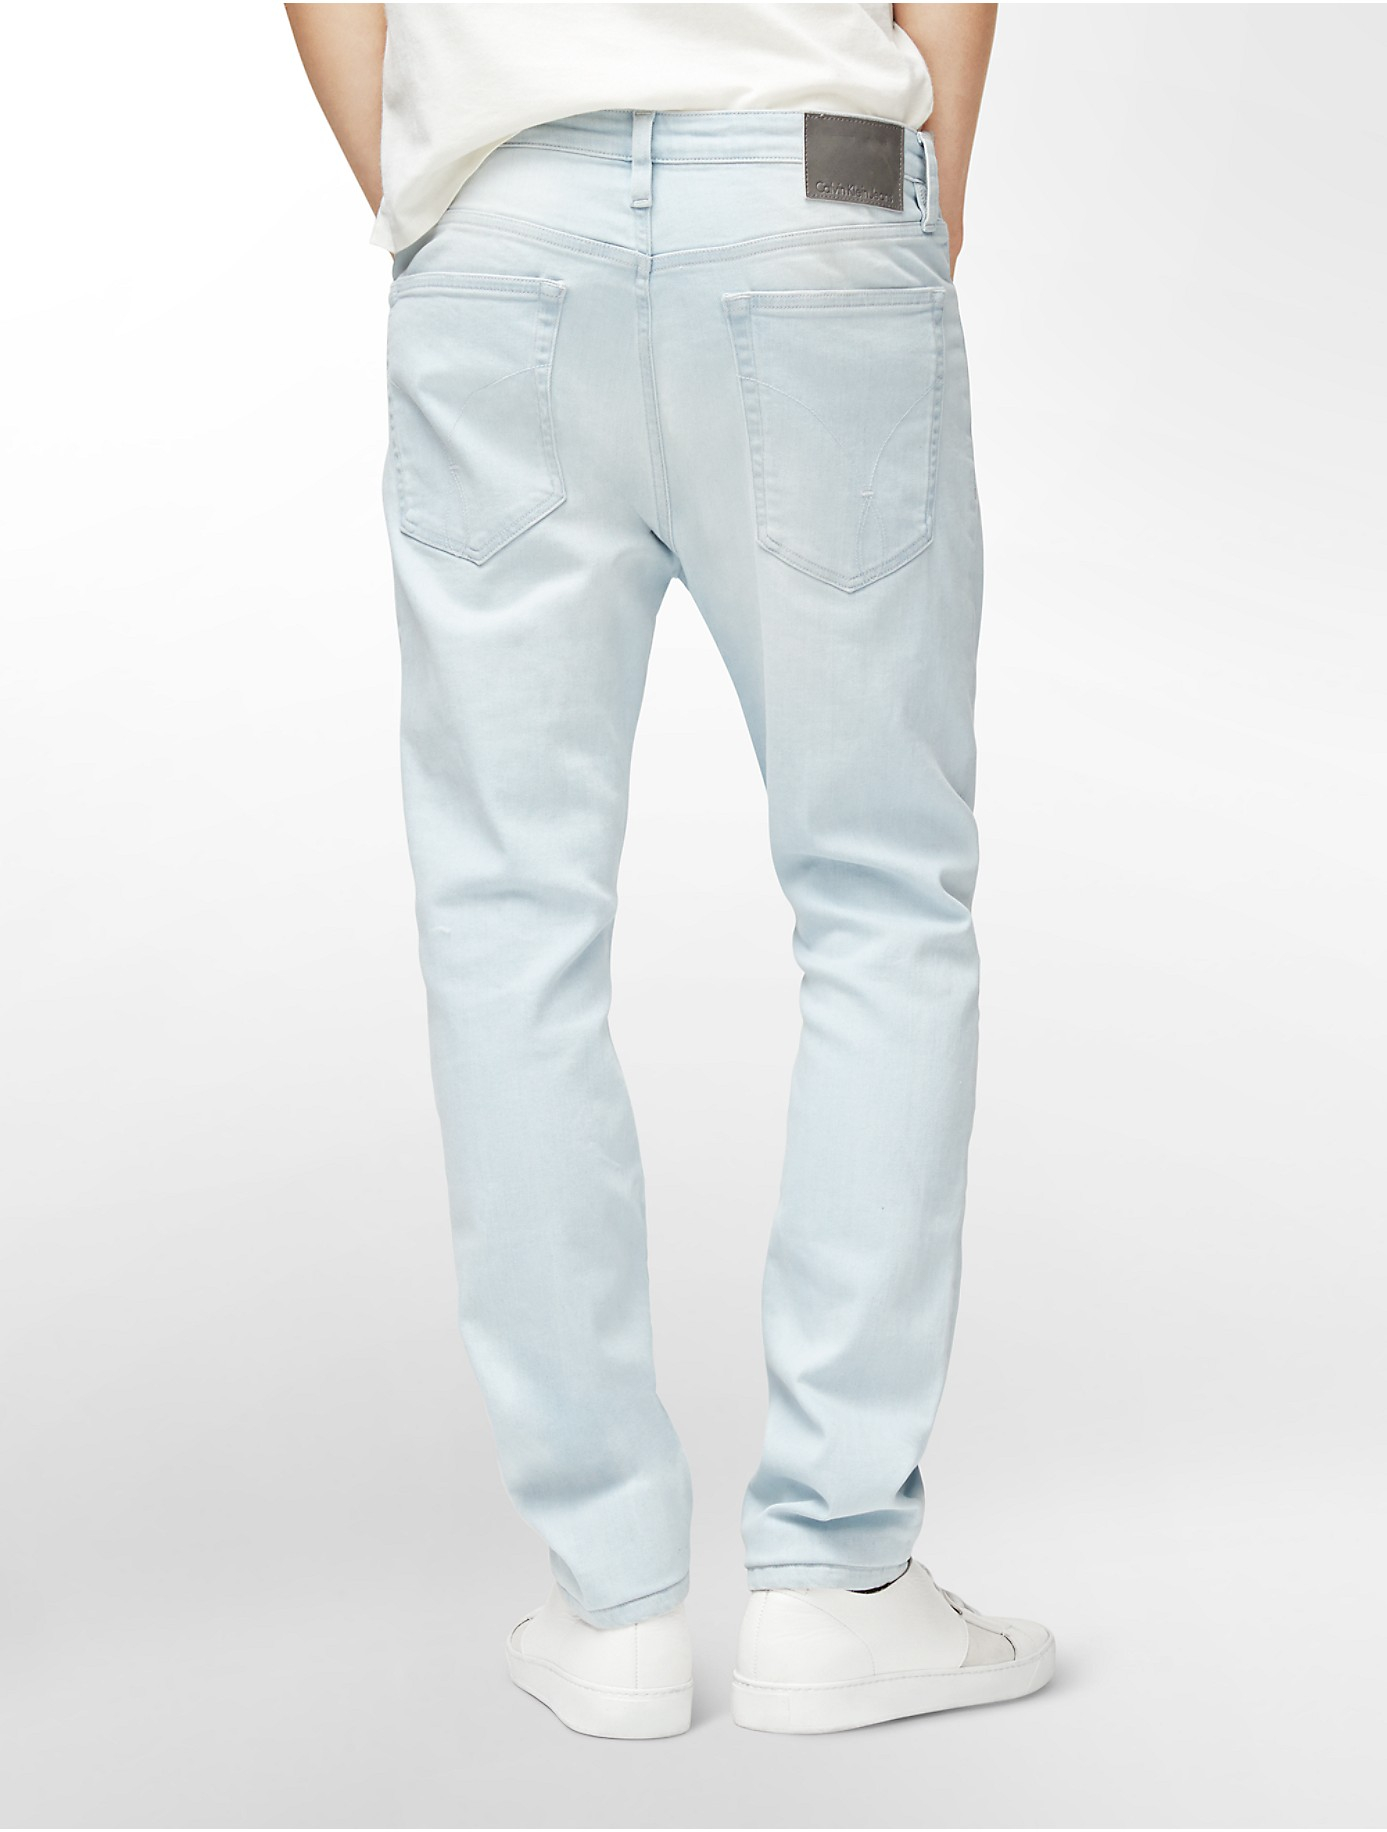 Lyst - Calvin Klein Jeans Cameron Slim Tapered Leg Light Wash Jeans in